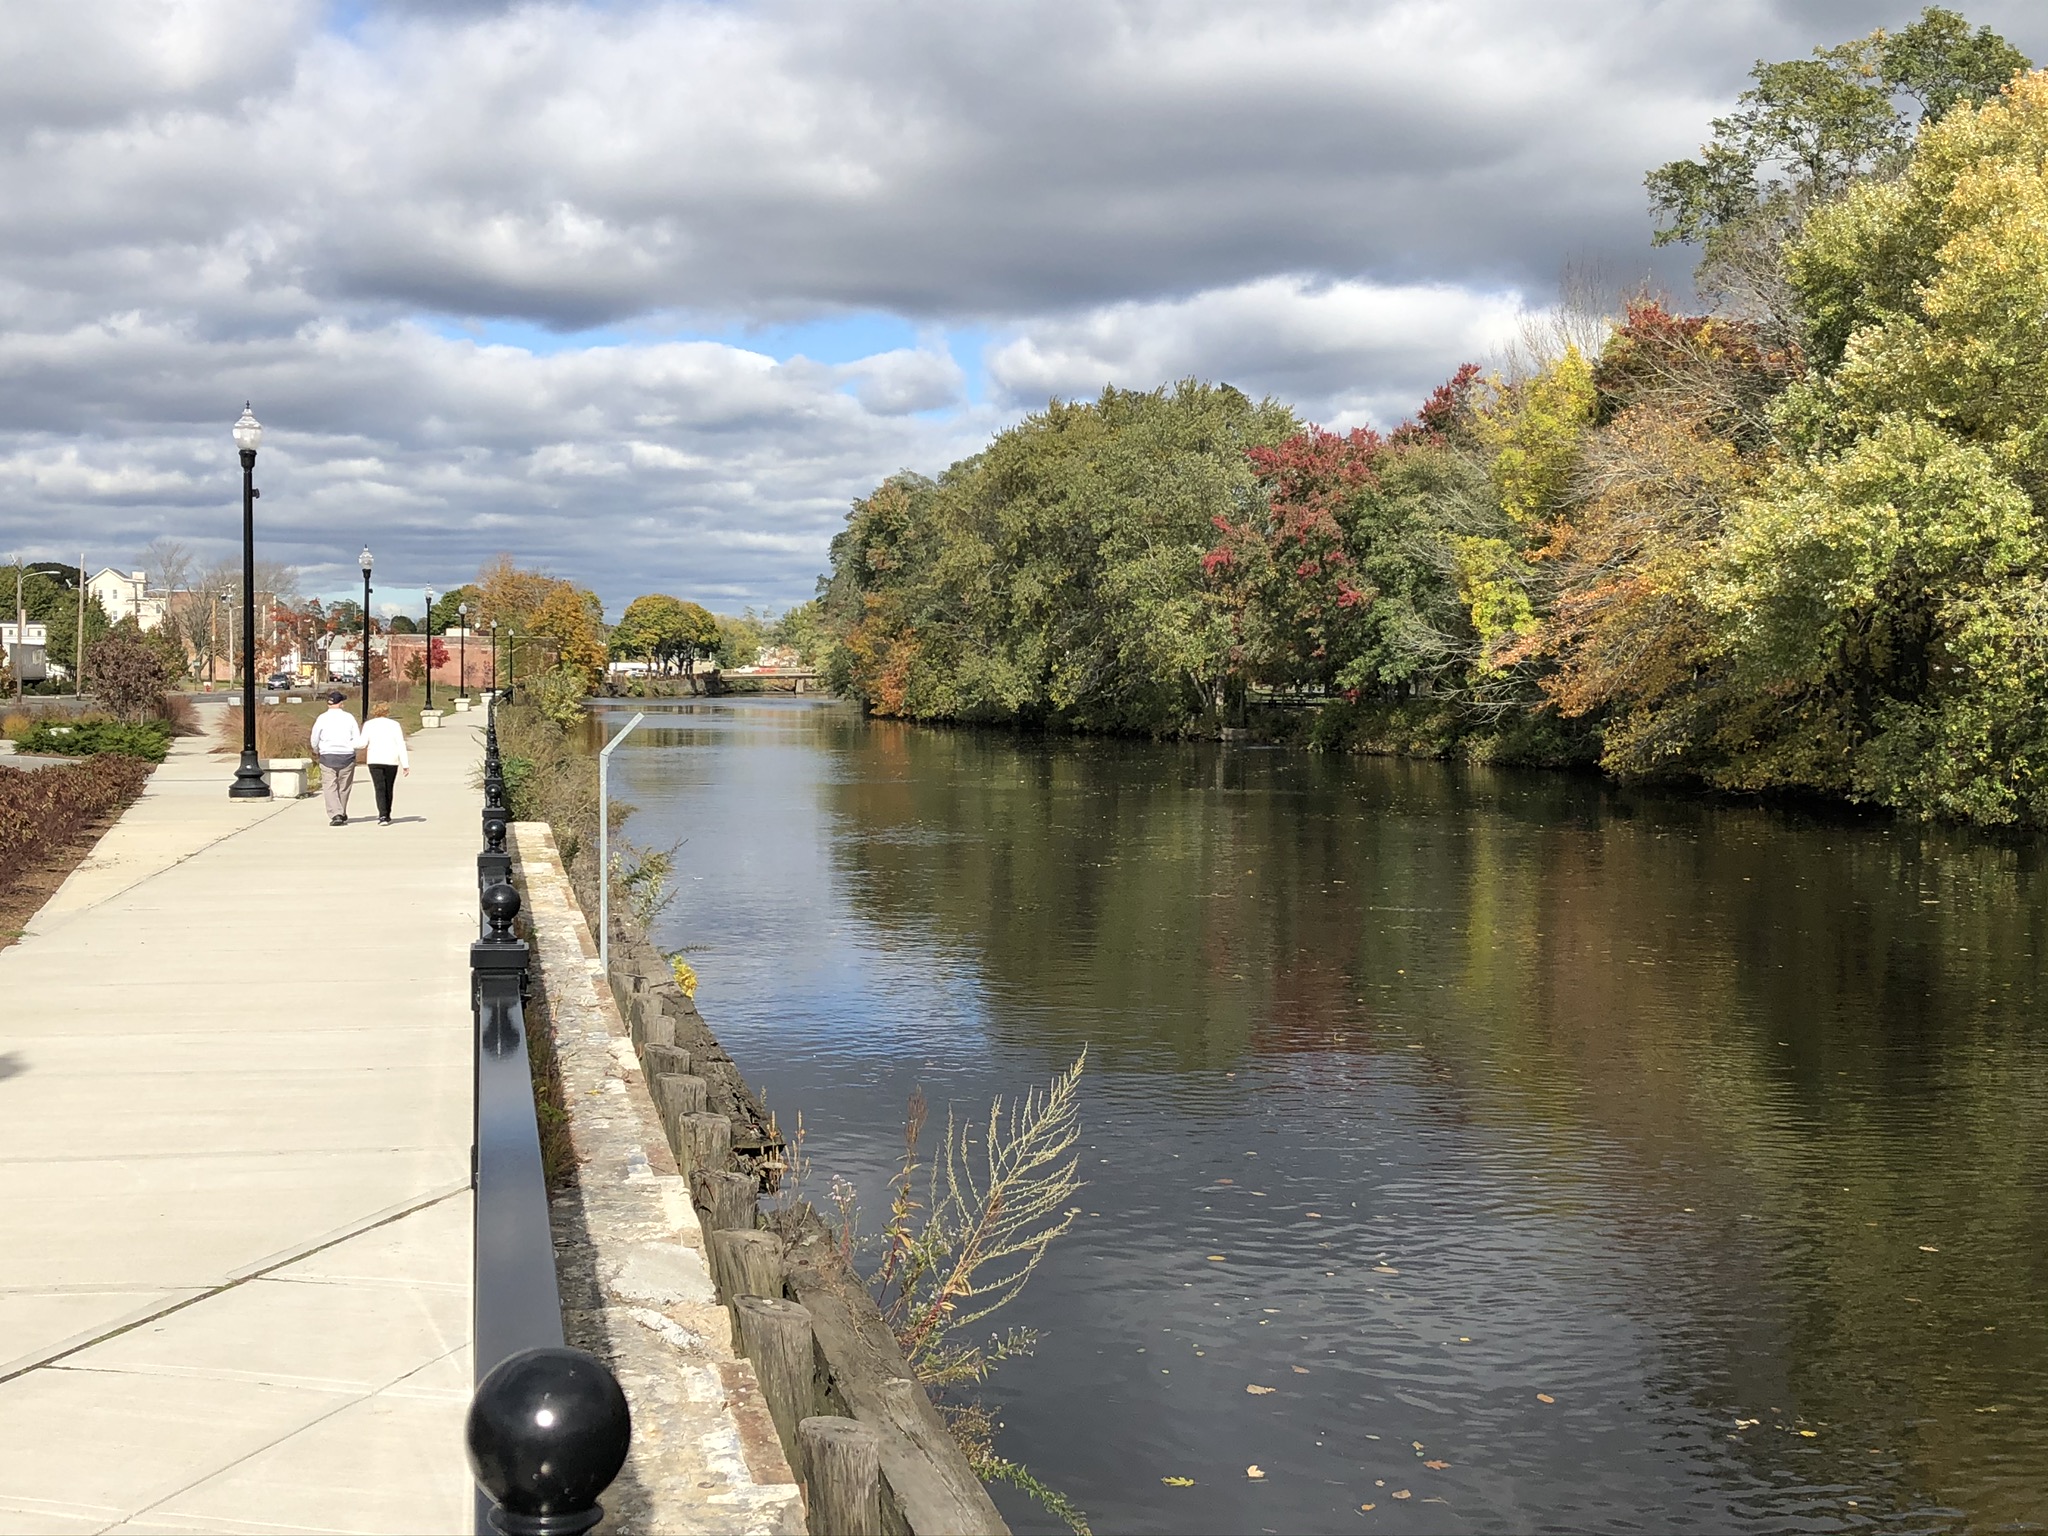 The Taunton River, with the riverside walkway on the left and trees on the right. A couple walks down the walkway in the distance.